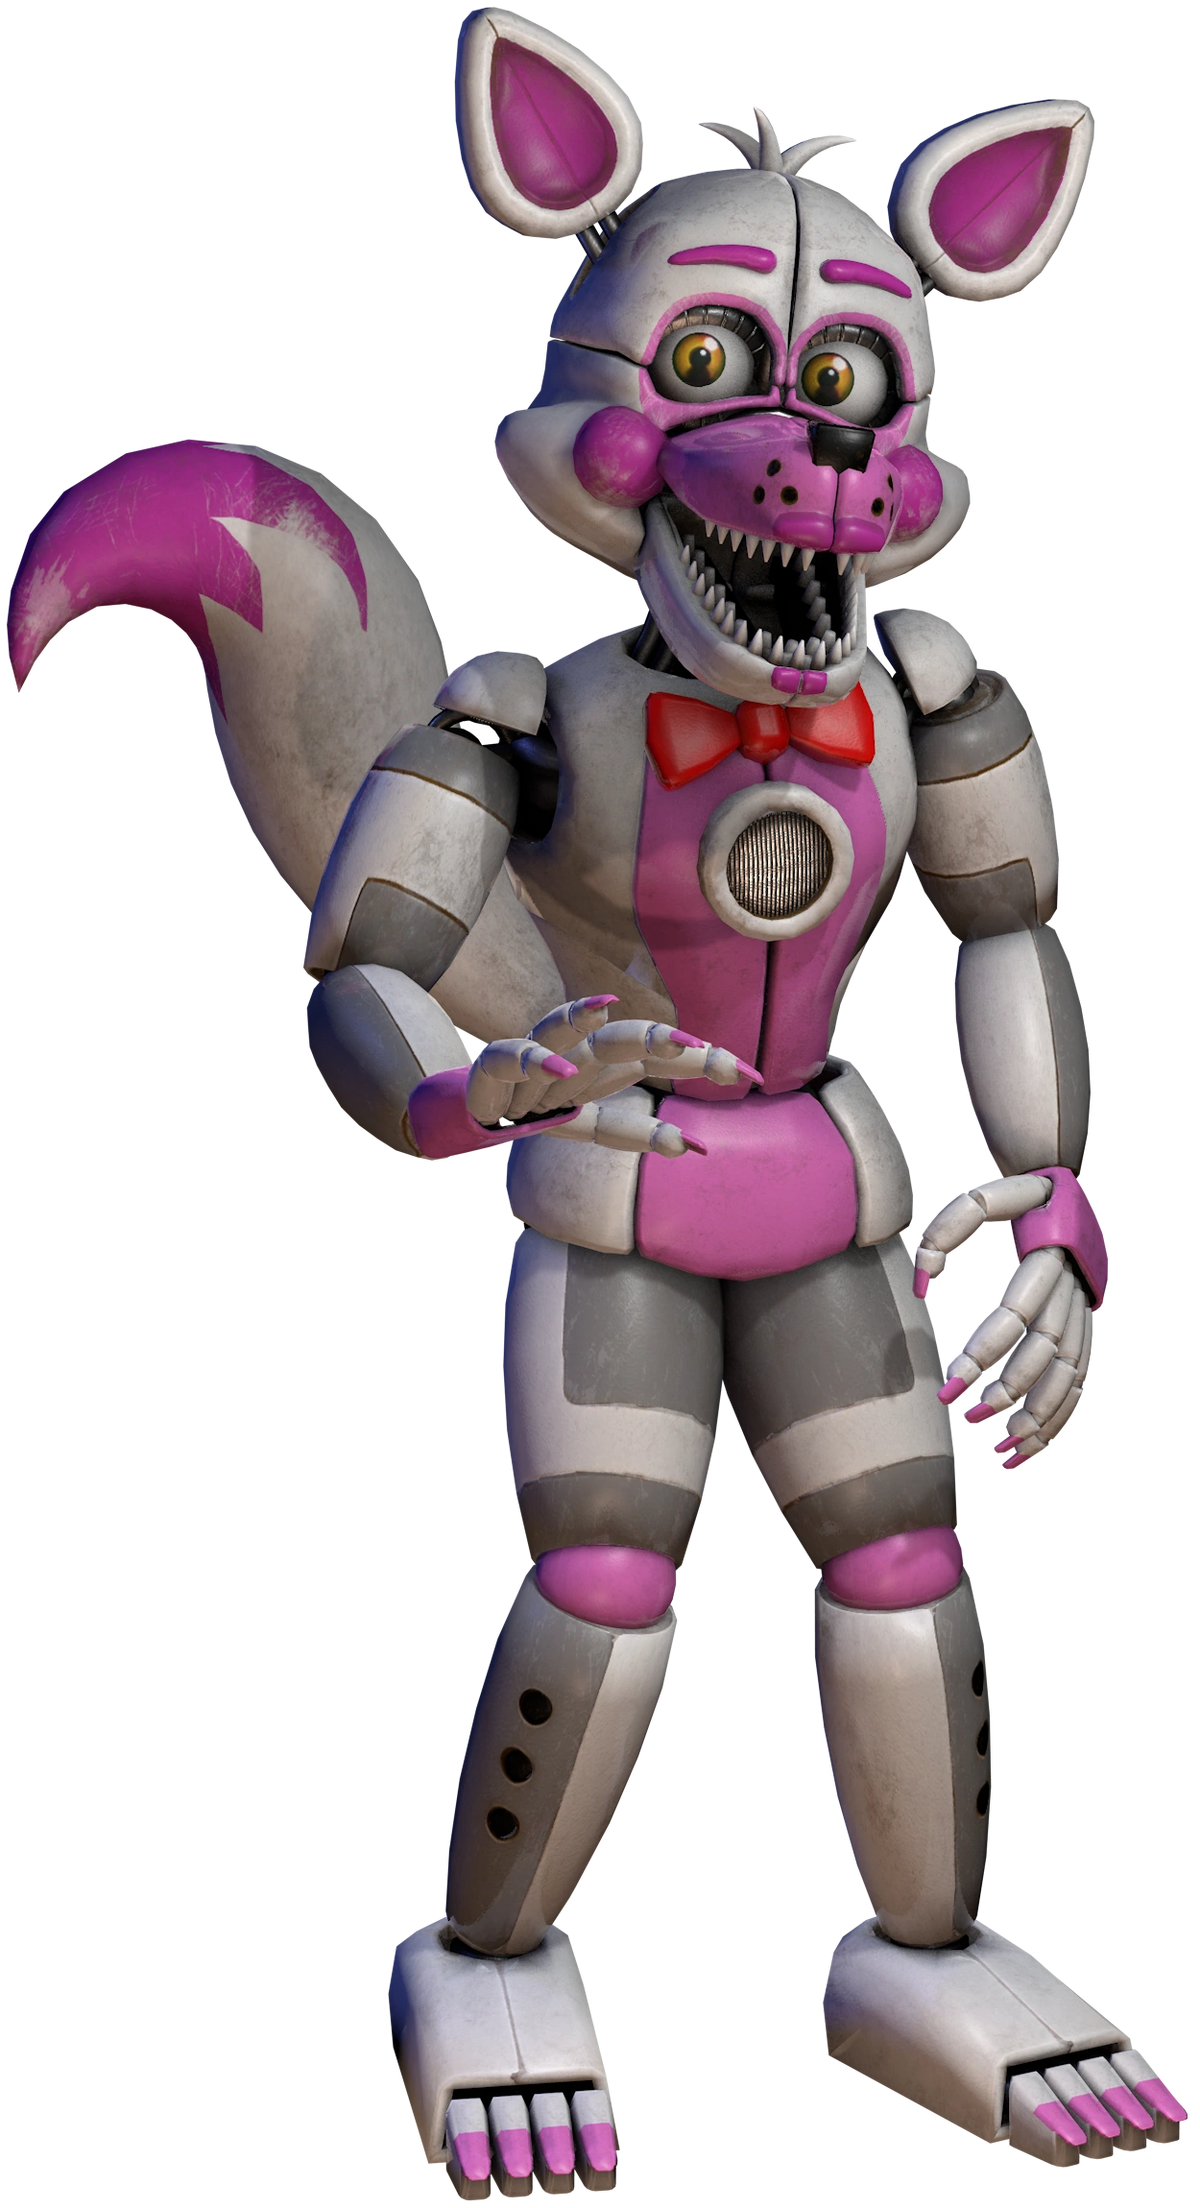 Stream DOORS OST:The Figure Enraged by Funtime Freddy